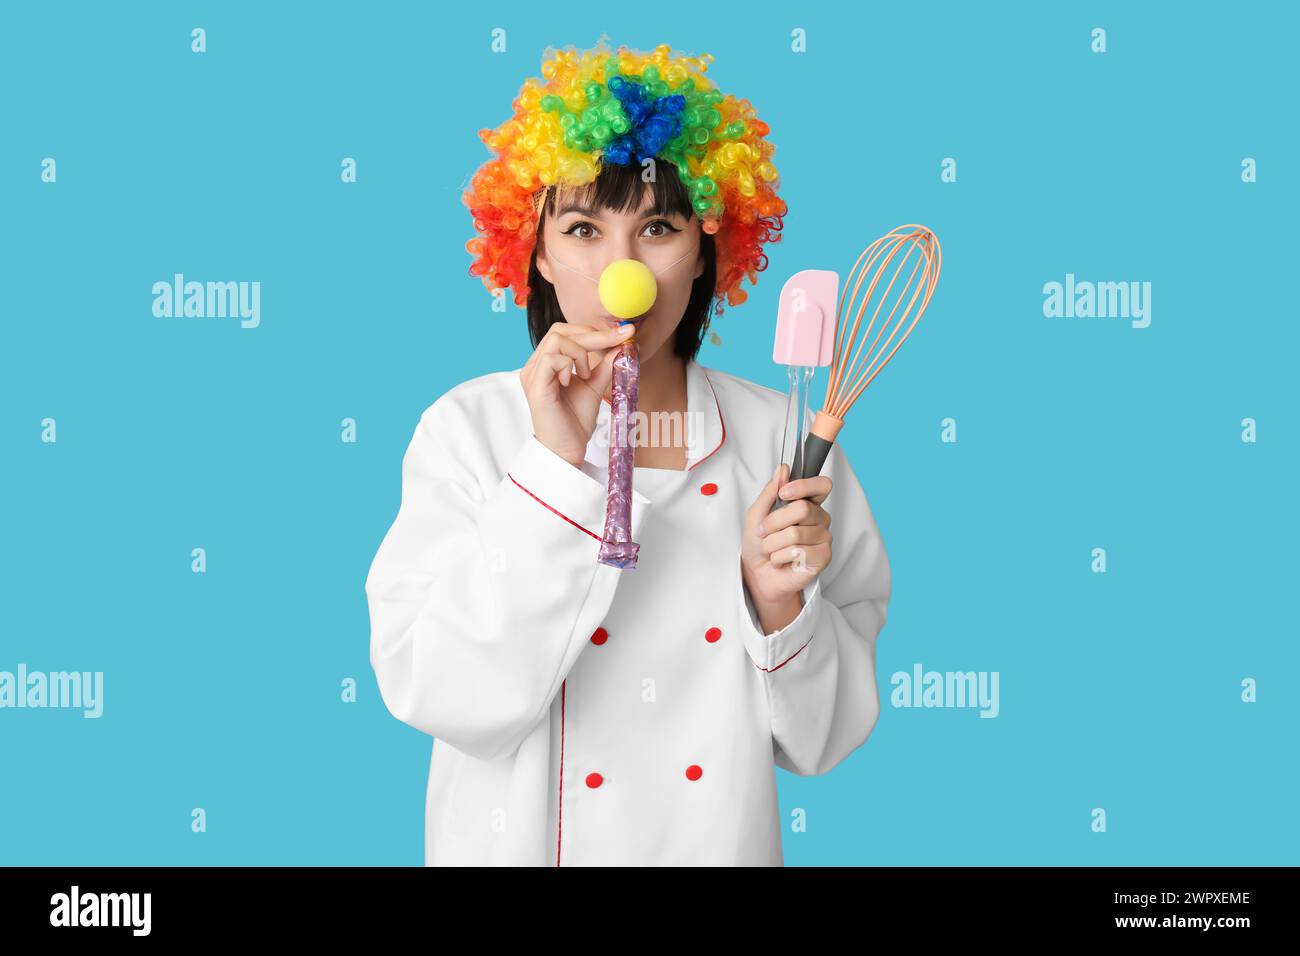 Young laughing female chef with party blower and kitchen utensils on blue background. Fool's day Stock Photo